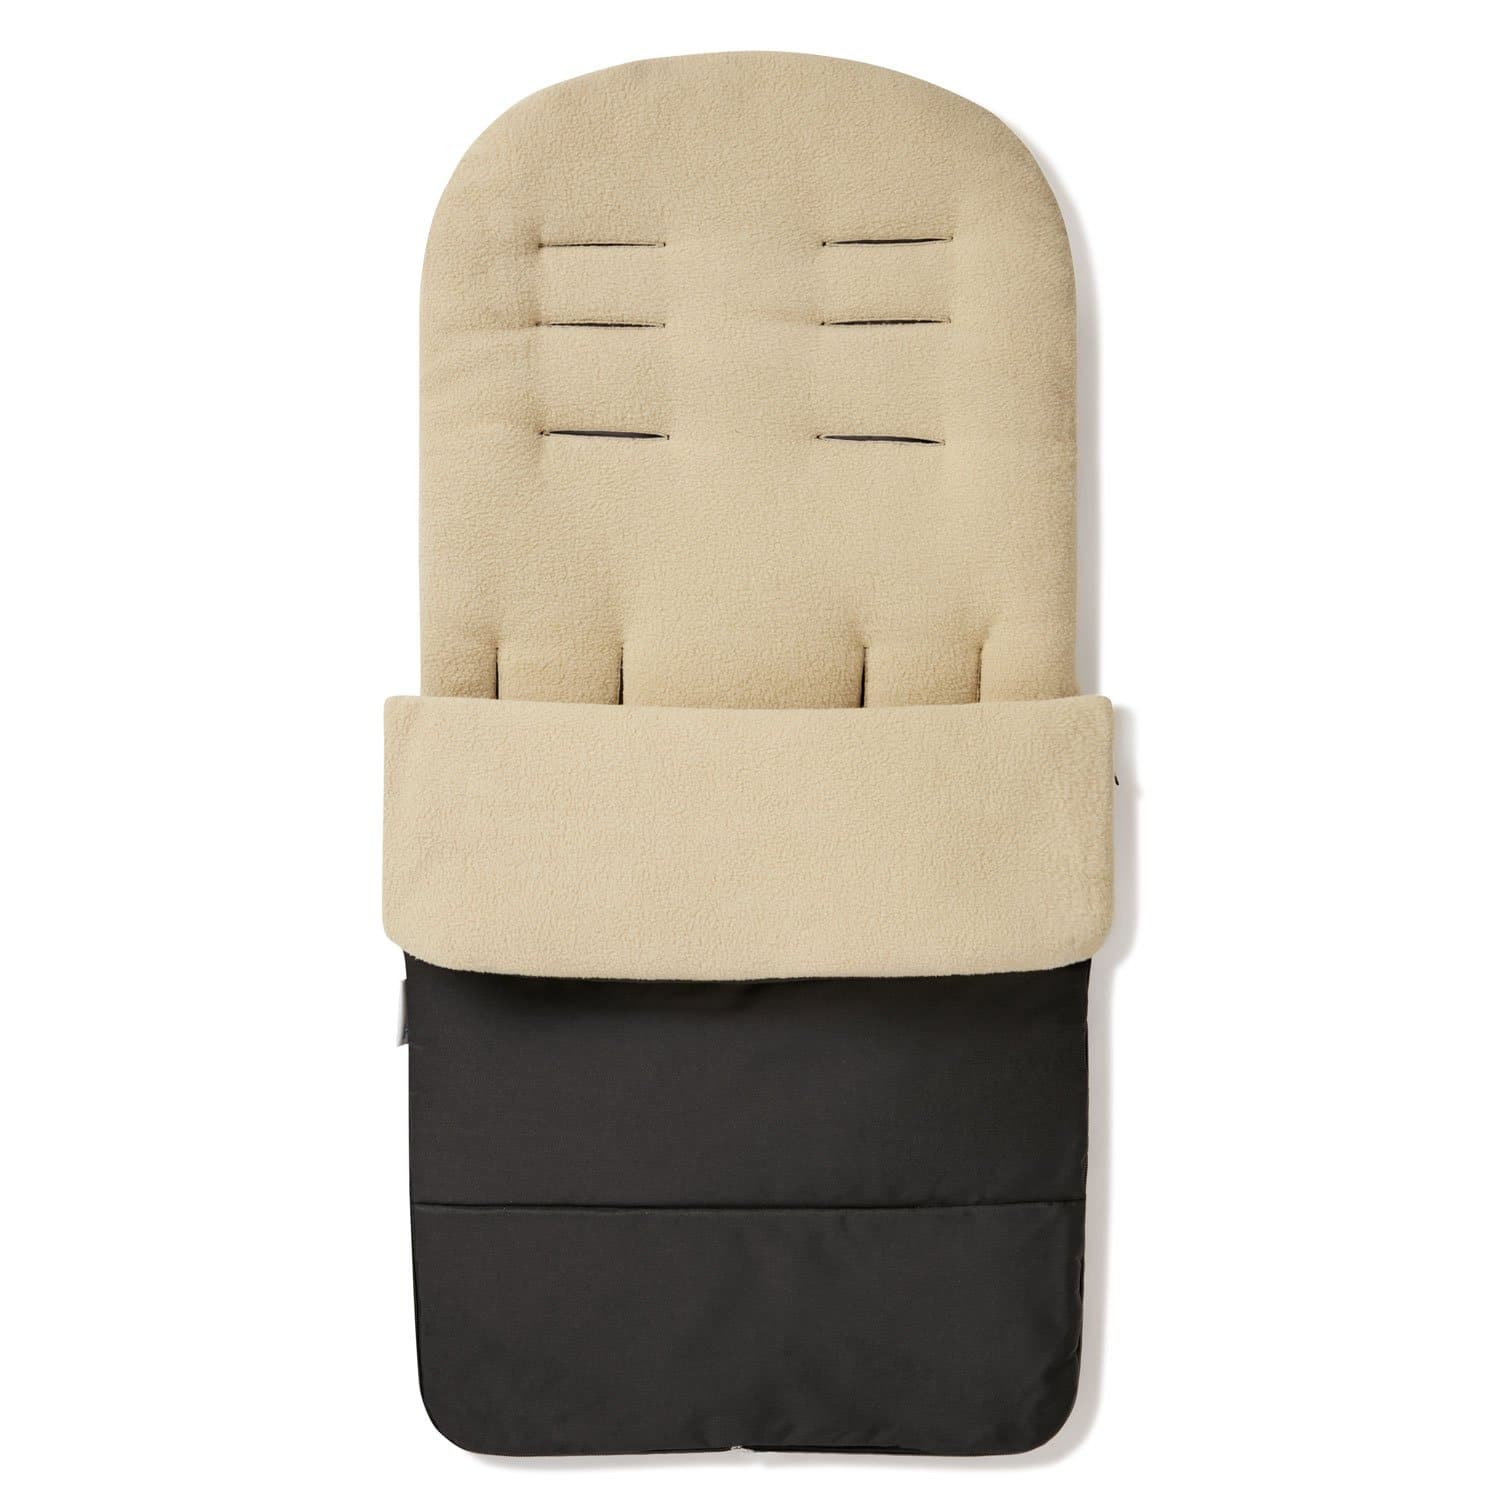 Premium Footmuff / Cosy Toes Compatible with Quax - Desert Sand / Fits All Models | For Your Little One